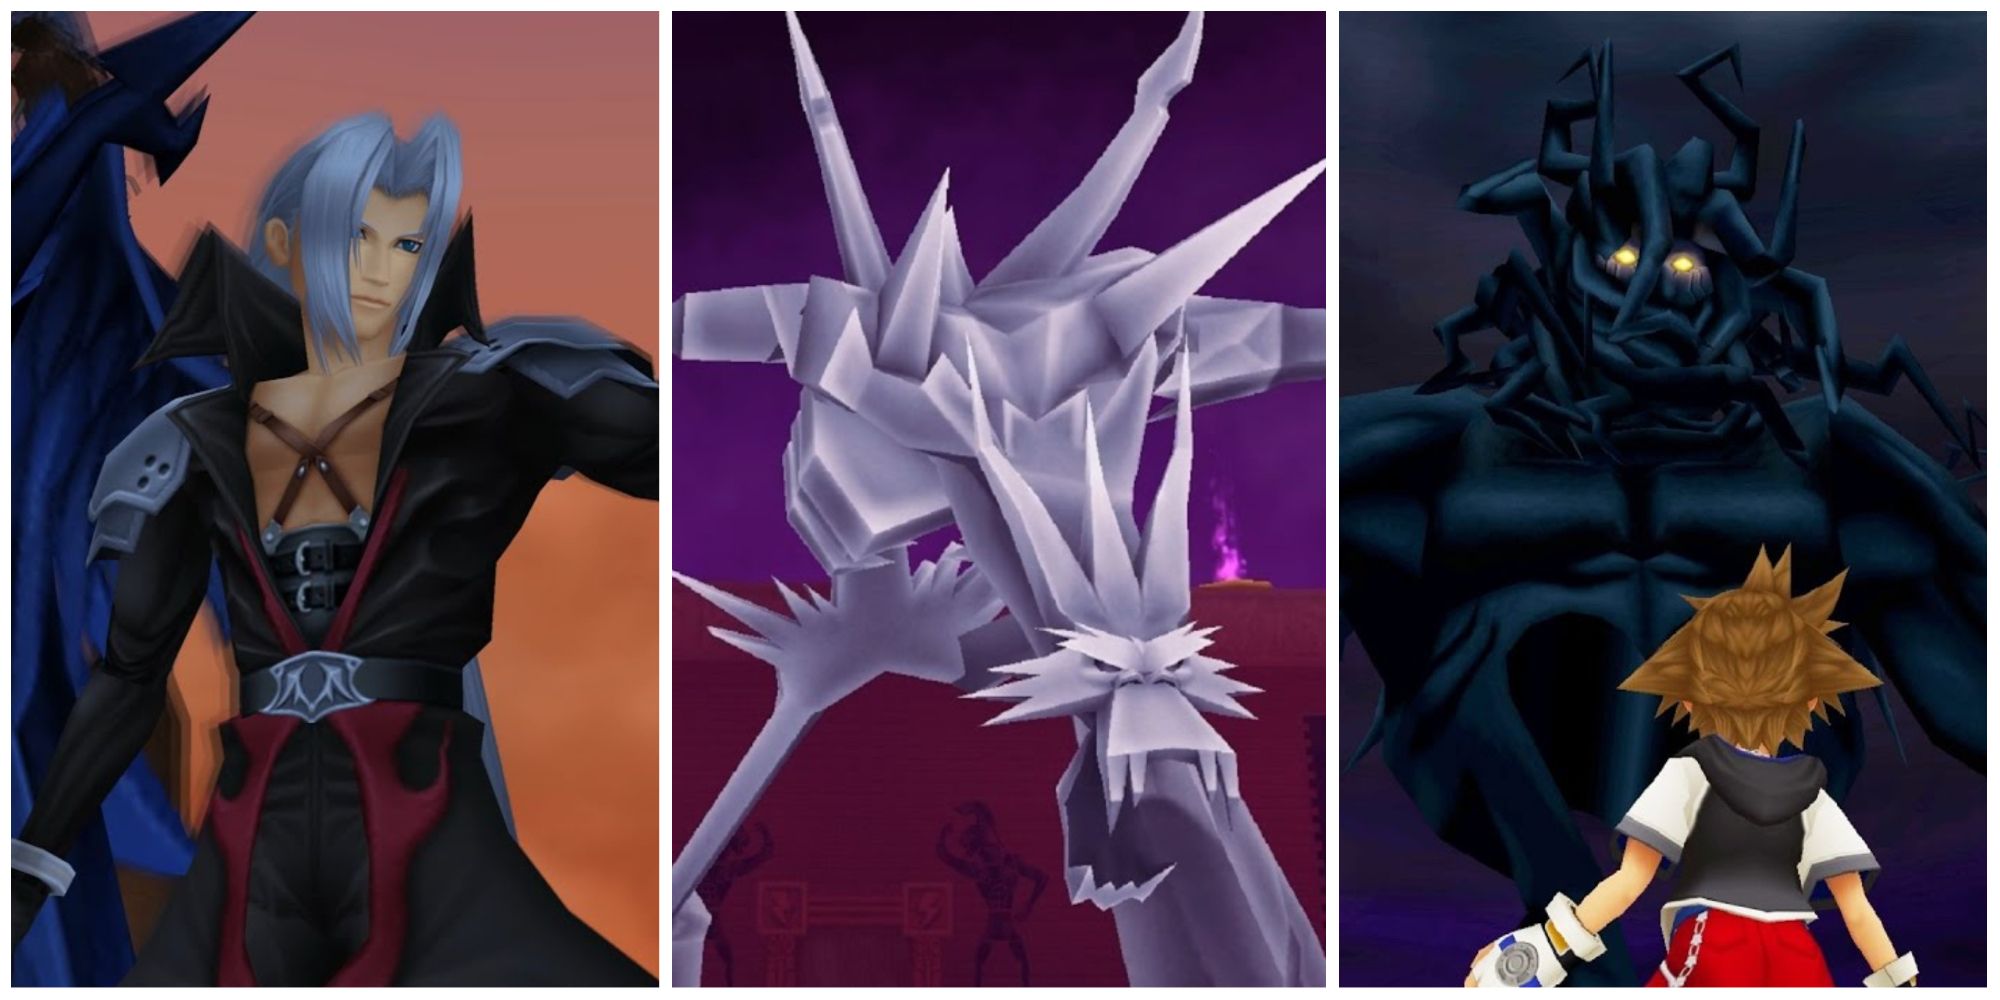 Sephiroth, Ice Titan, and Darkside in Kingdom Hearts